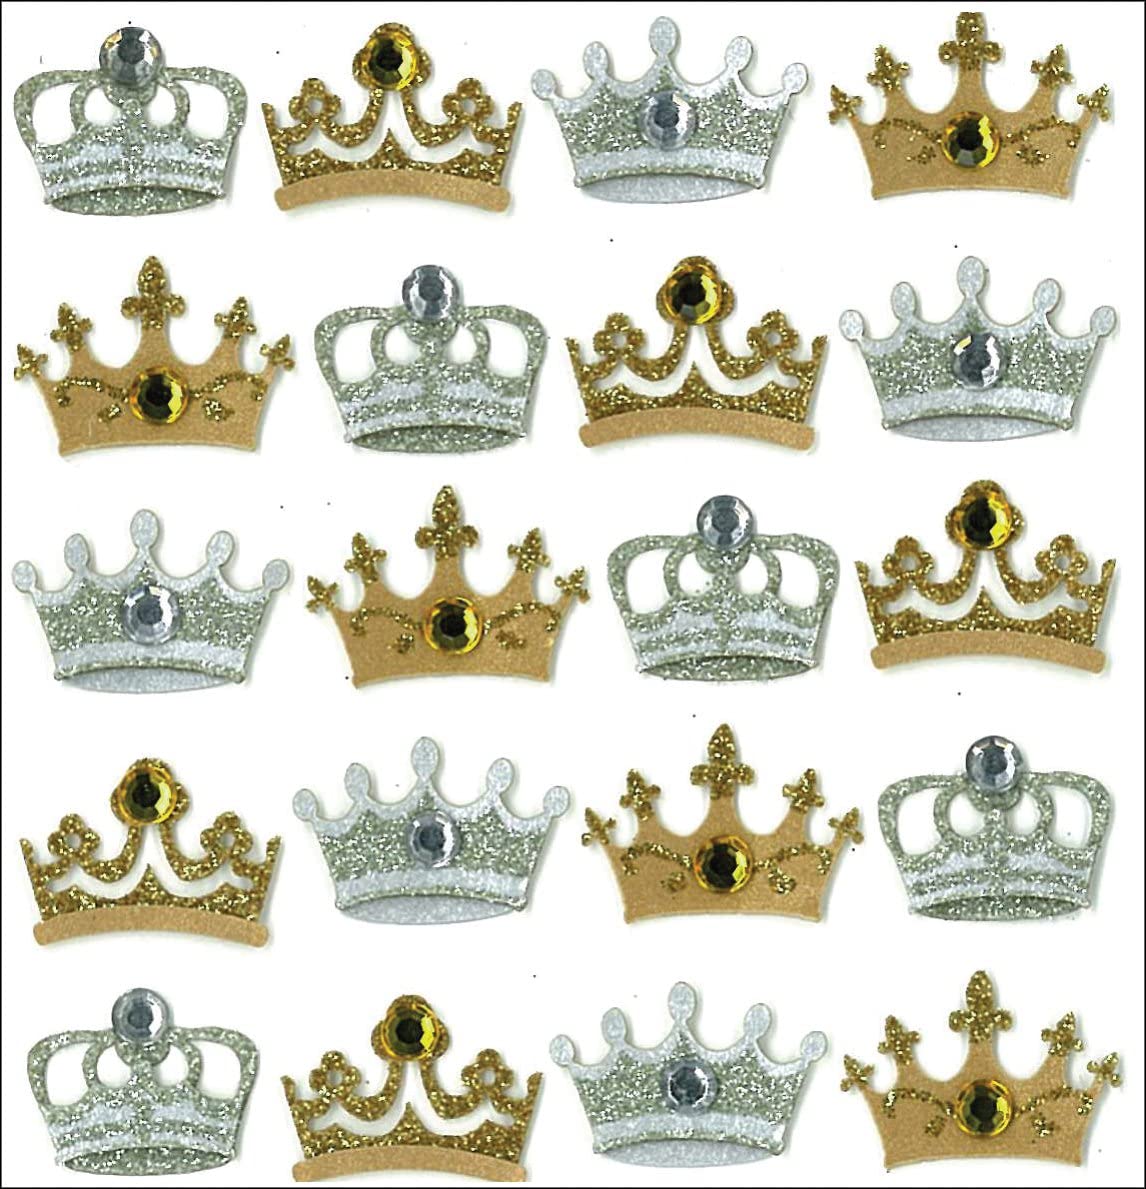 Jolee's Mini Repeats Crowns Stickers, Gold/Sliver